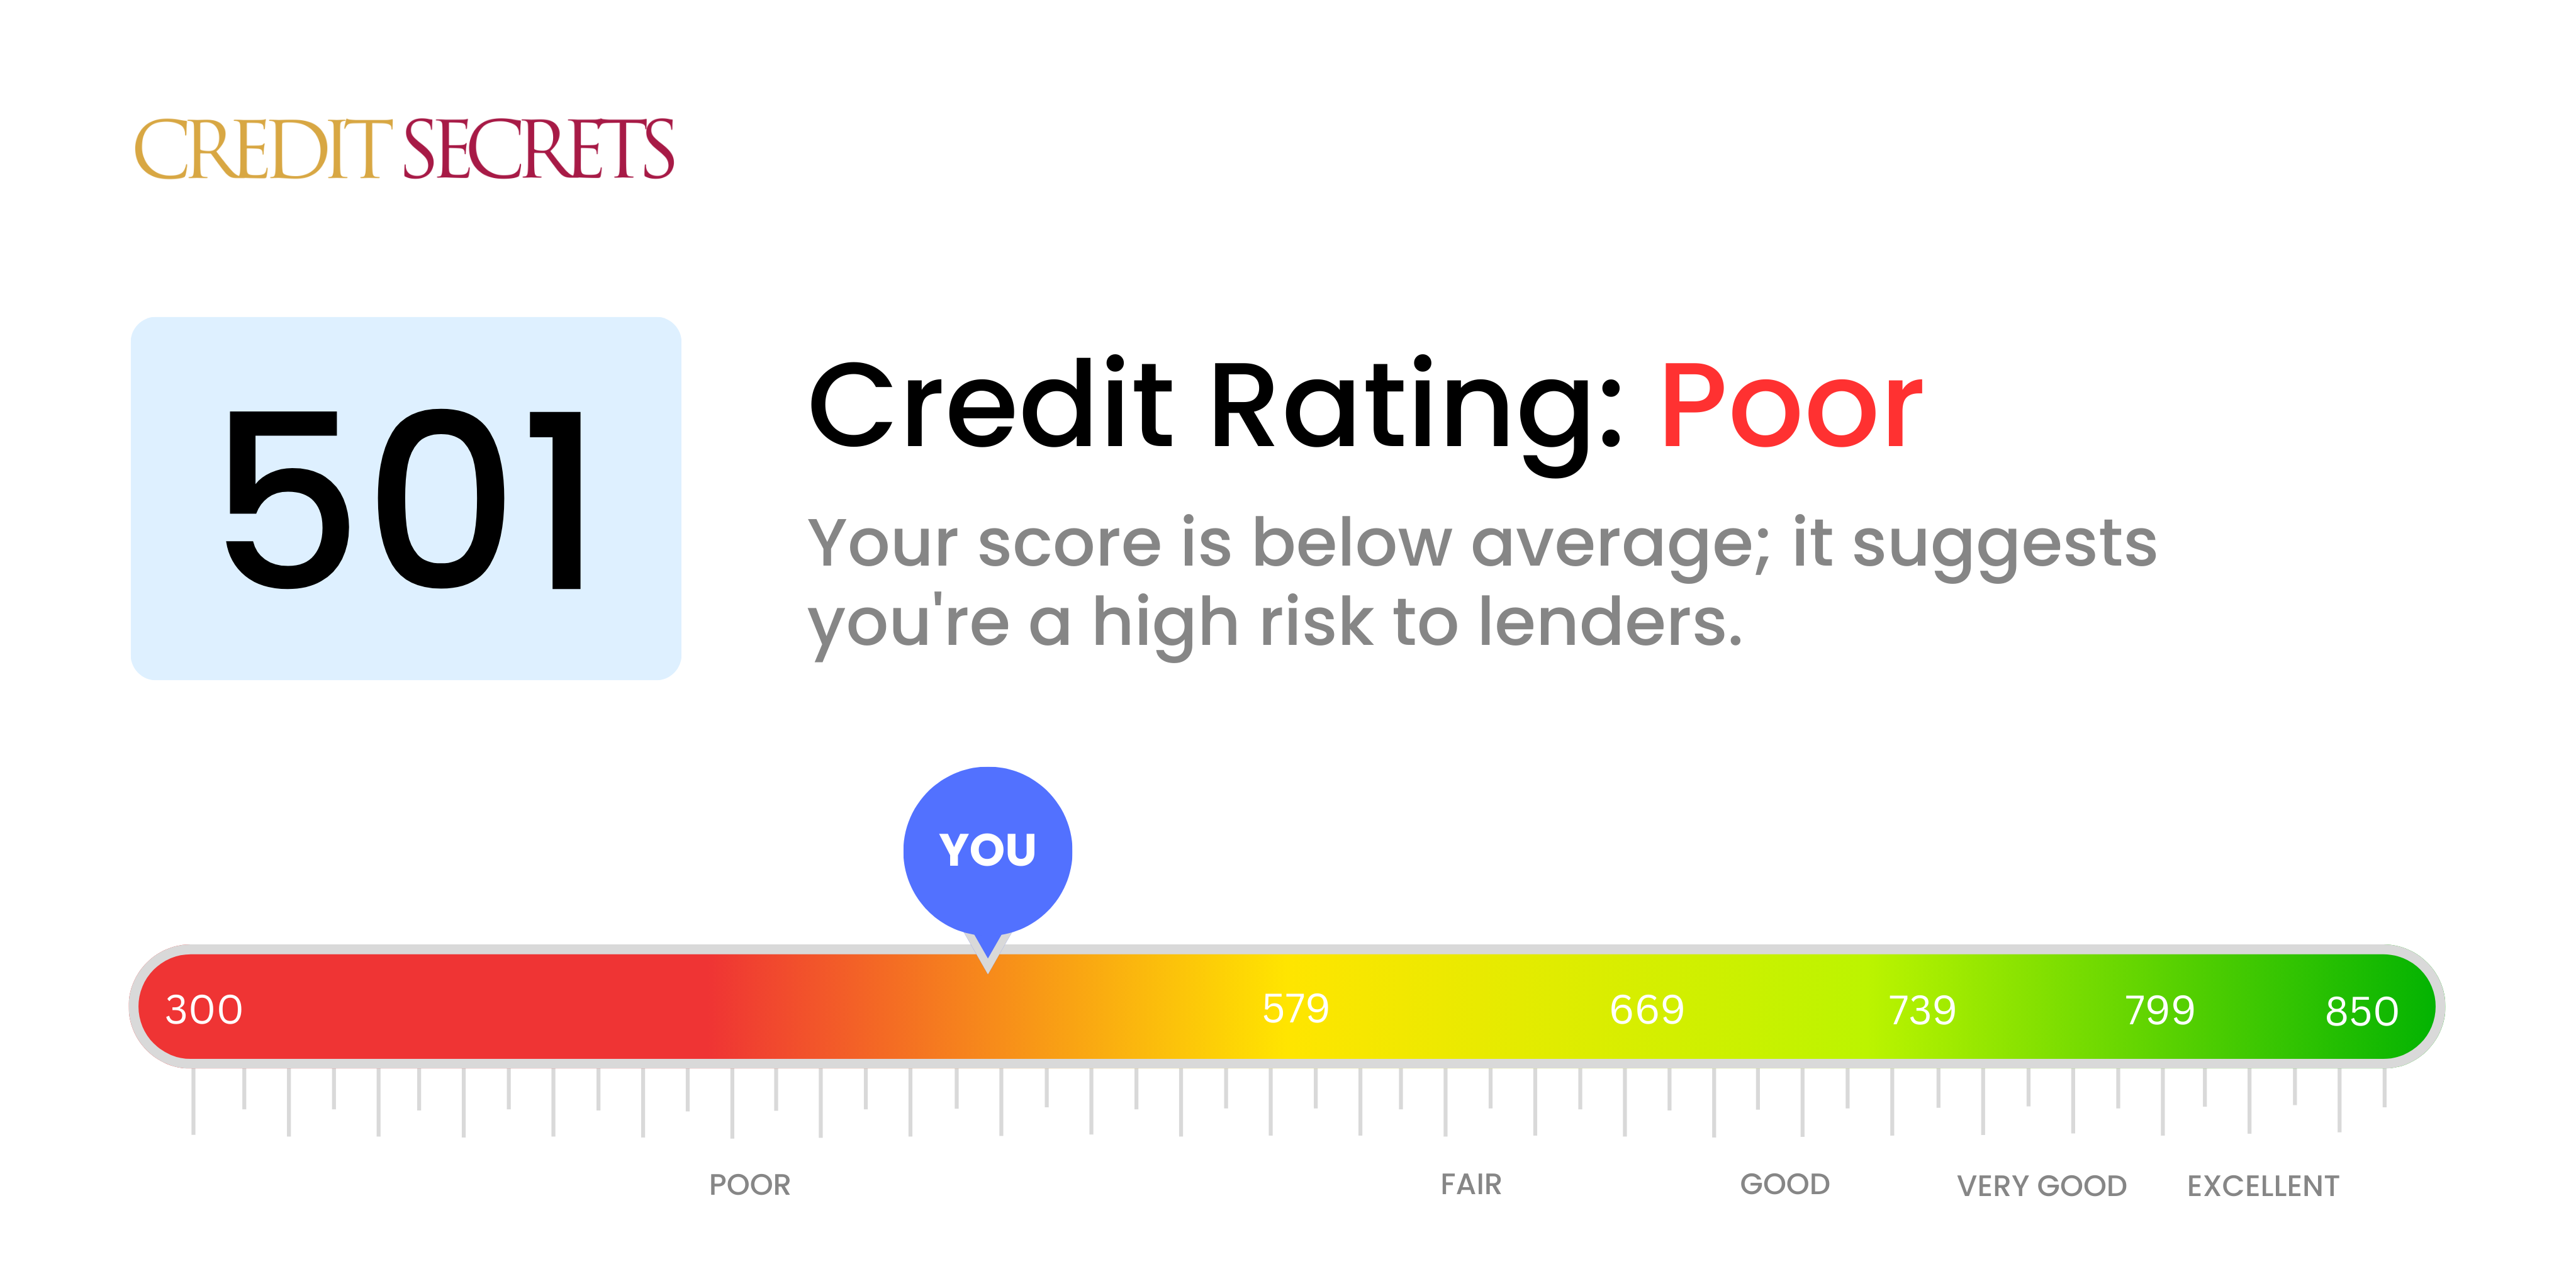 Is 501 a good credit score?